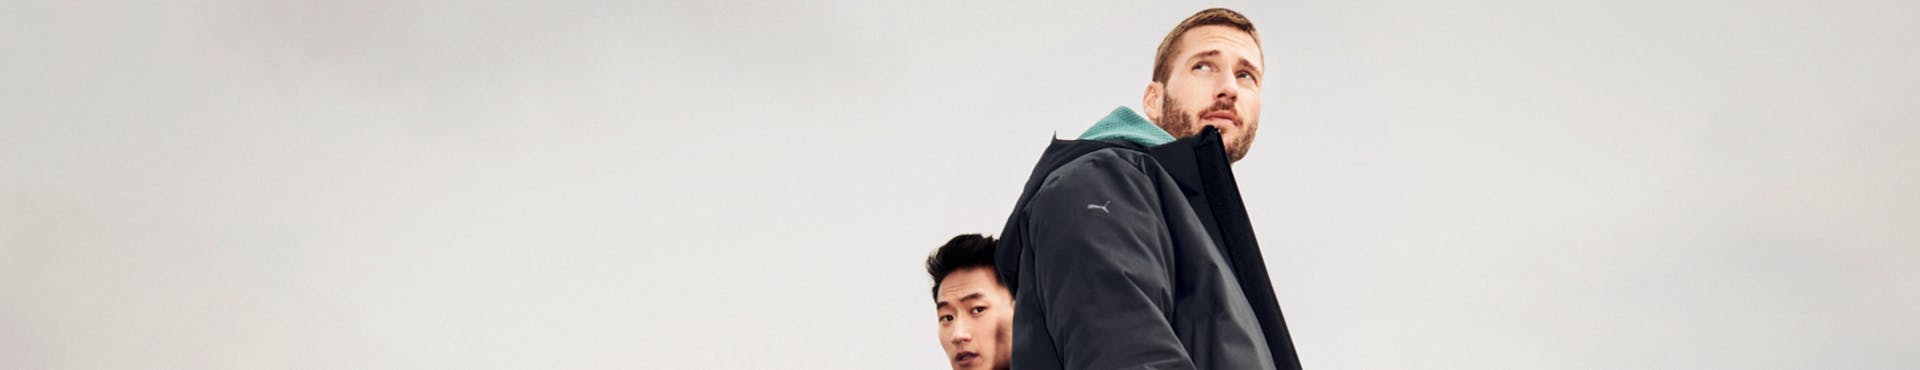 Two men photographed from below are wearing clothes from Porsche Design Fall Winter Sport collection. The man with black hair looks down at the camera, while the man with brunette hair looks into the distance.